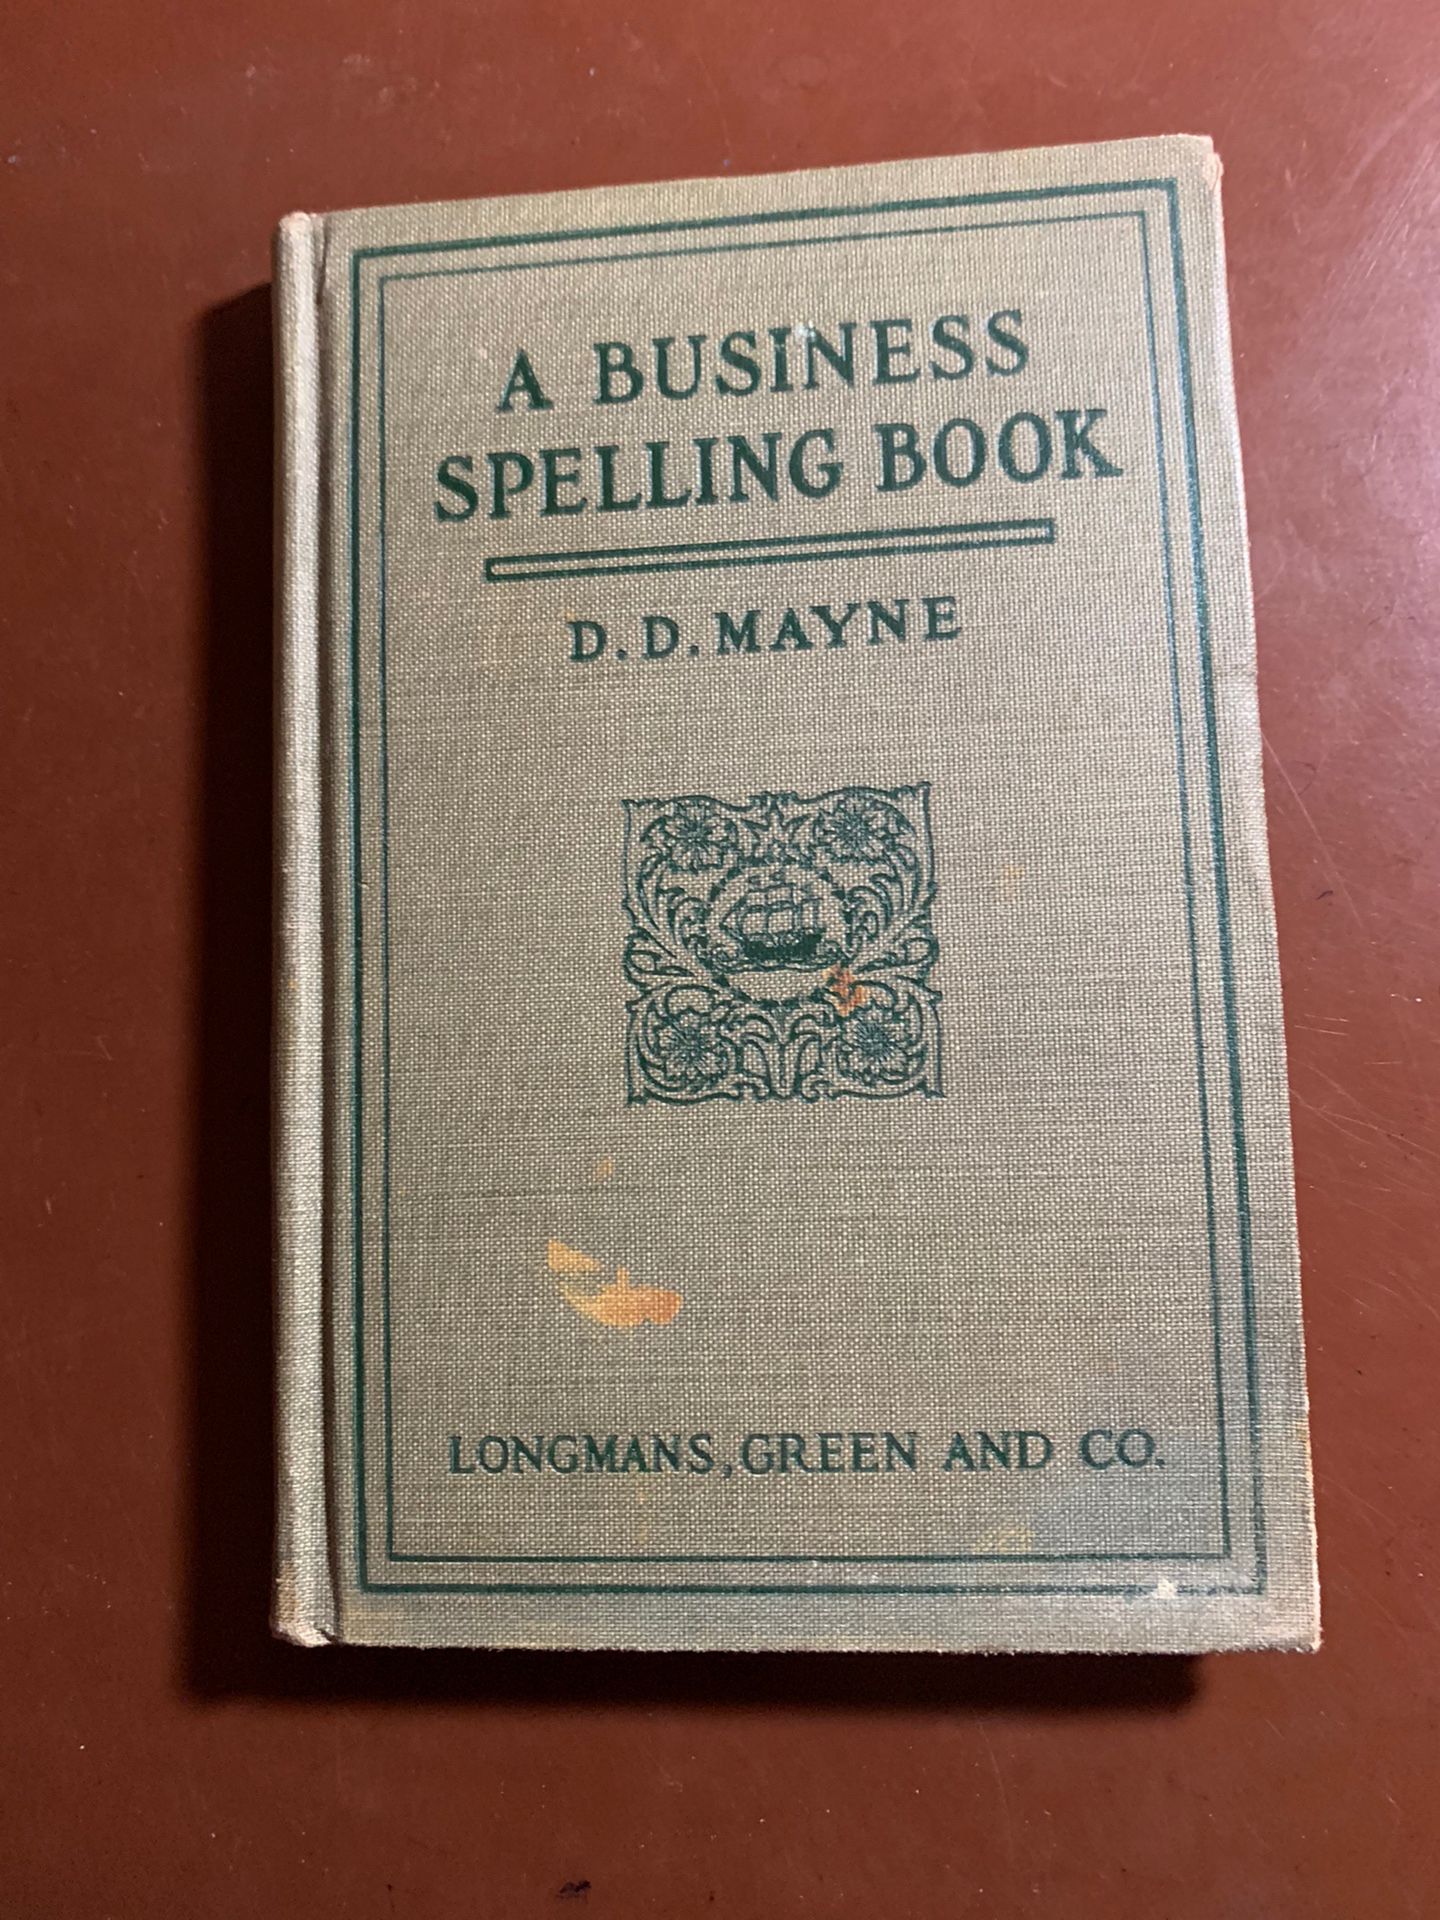 A BUSINESS SPELLING BOOK by D.D.MAYNE From 1913!  Still Relevant 100 Years Later!